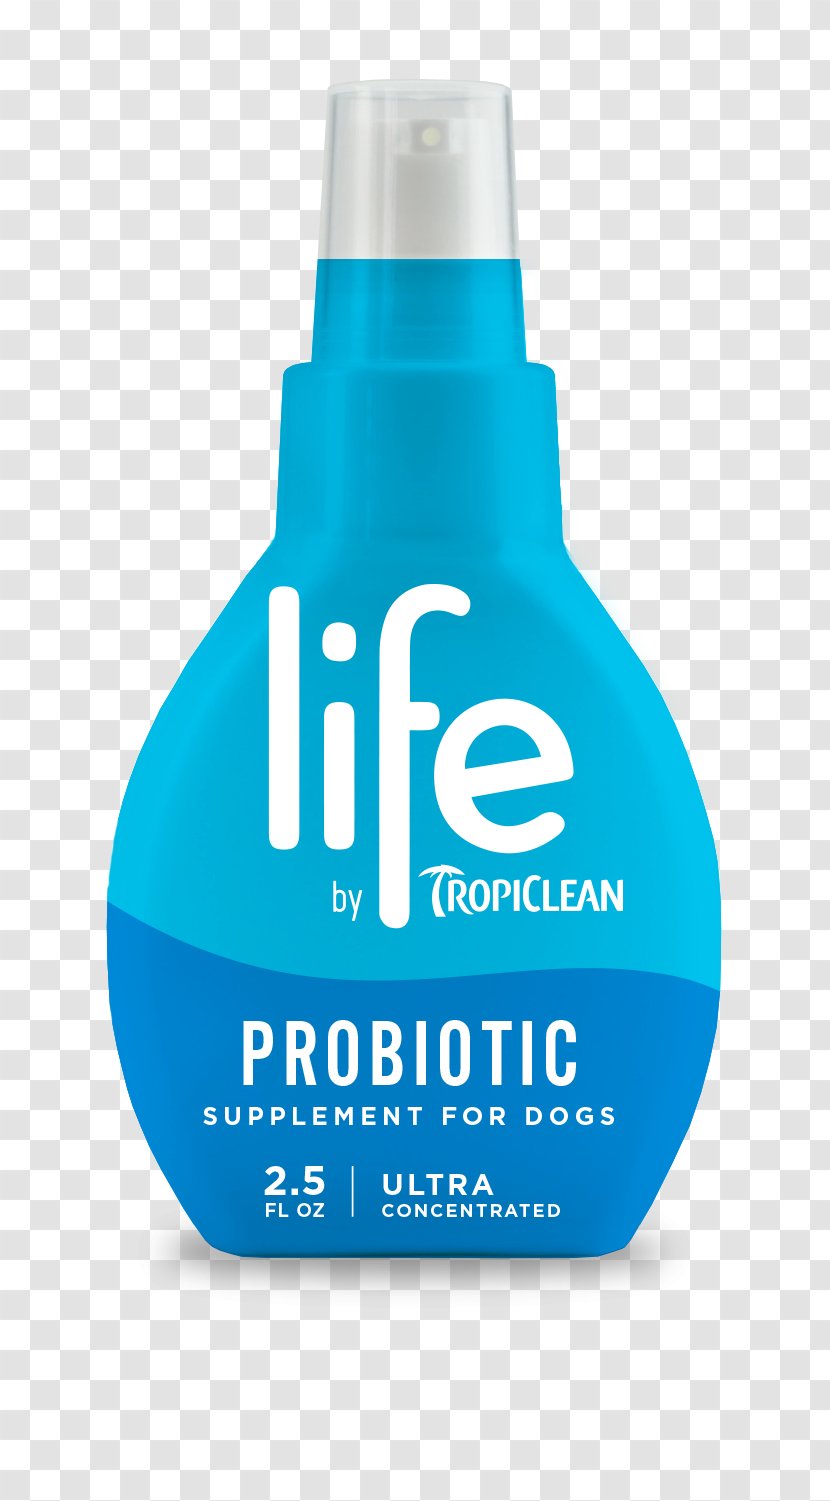 Rosewood Life By Tropiclean Probiotic 75ml Supplement For Dogs Dietary - Fluid Ounce - Genesis Archery Equipment Transparent PNG